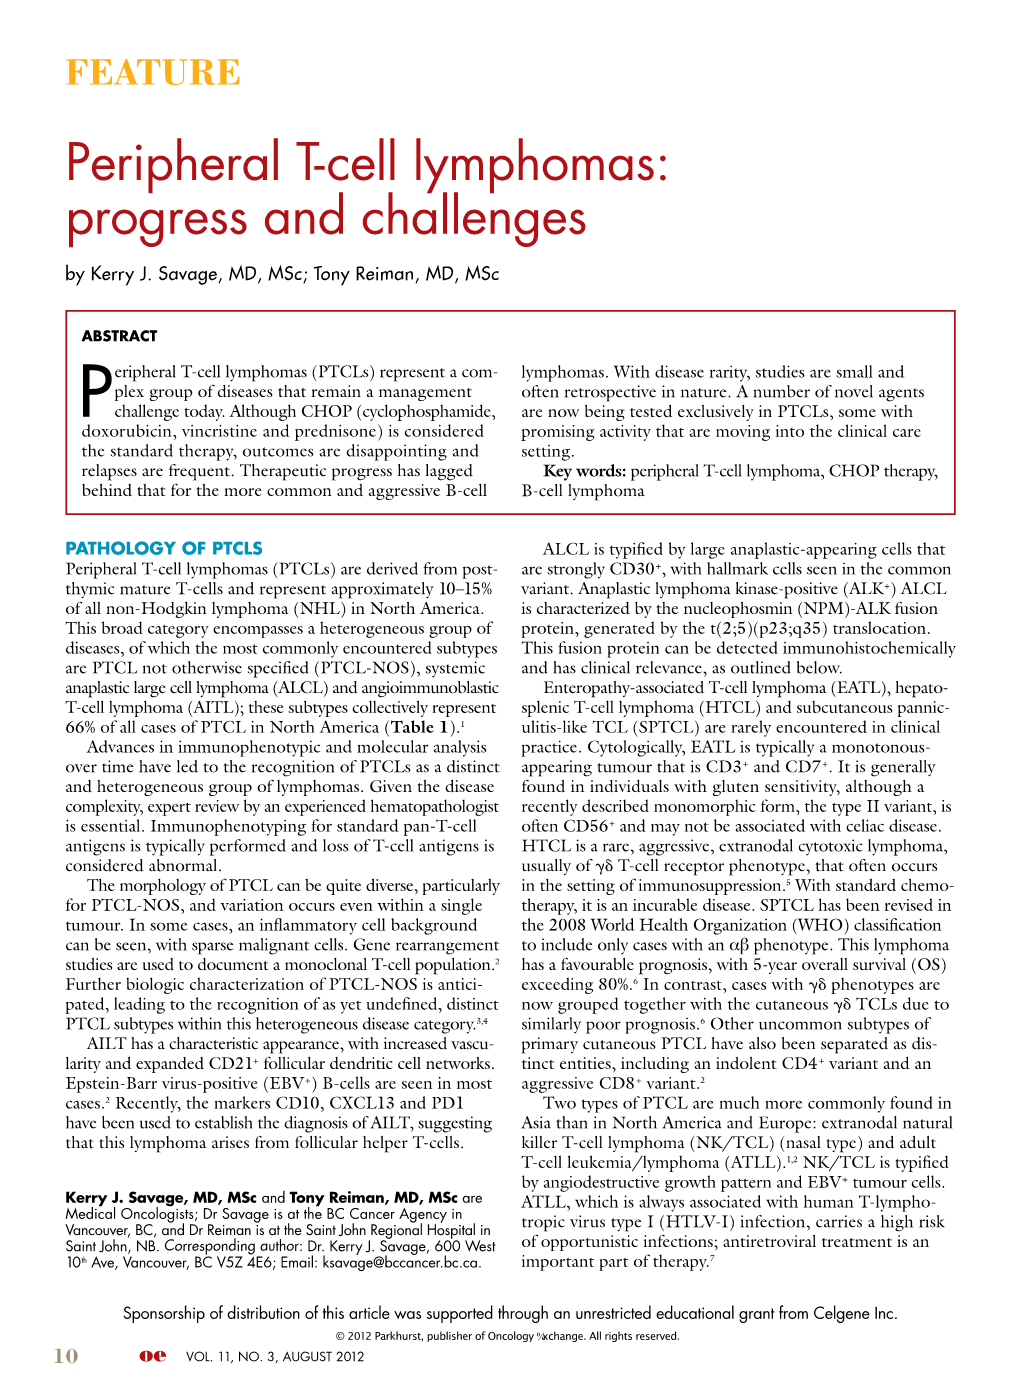 Peripheral T-Cell Lymphomas: Progress and Challenges